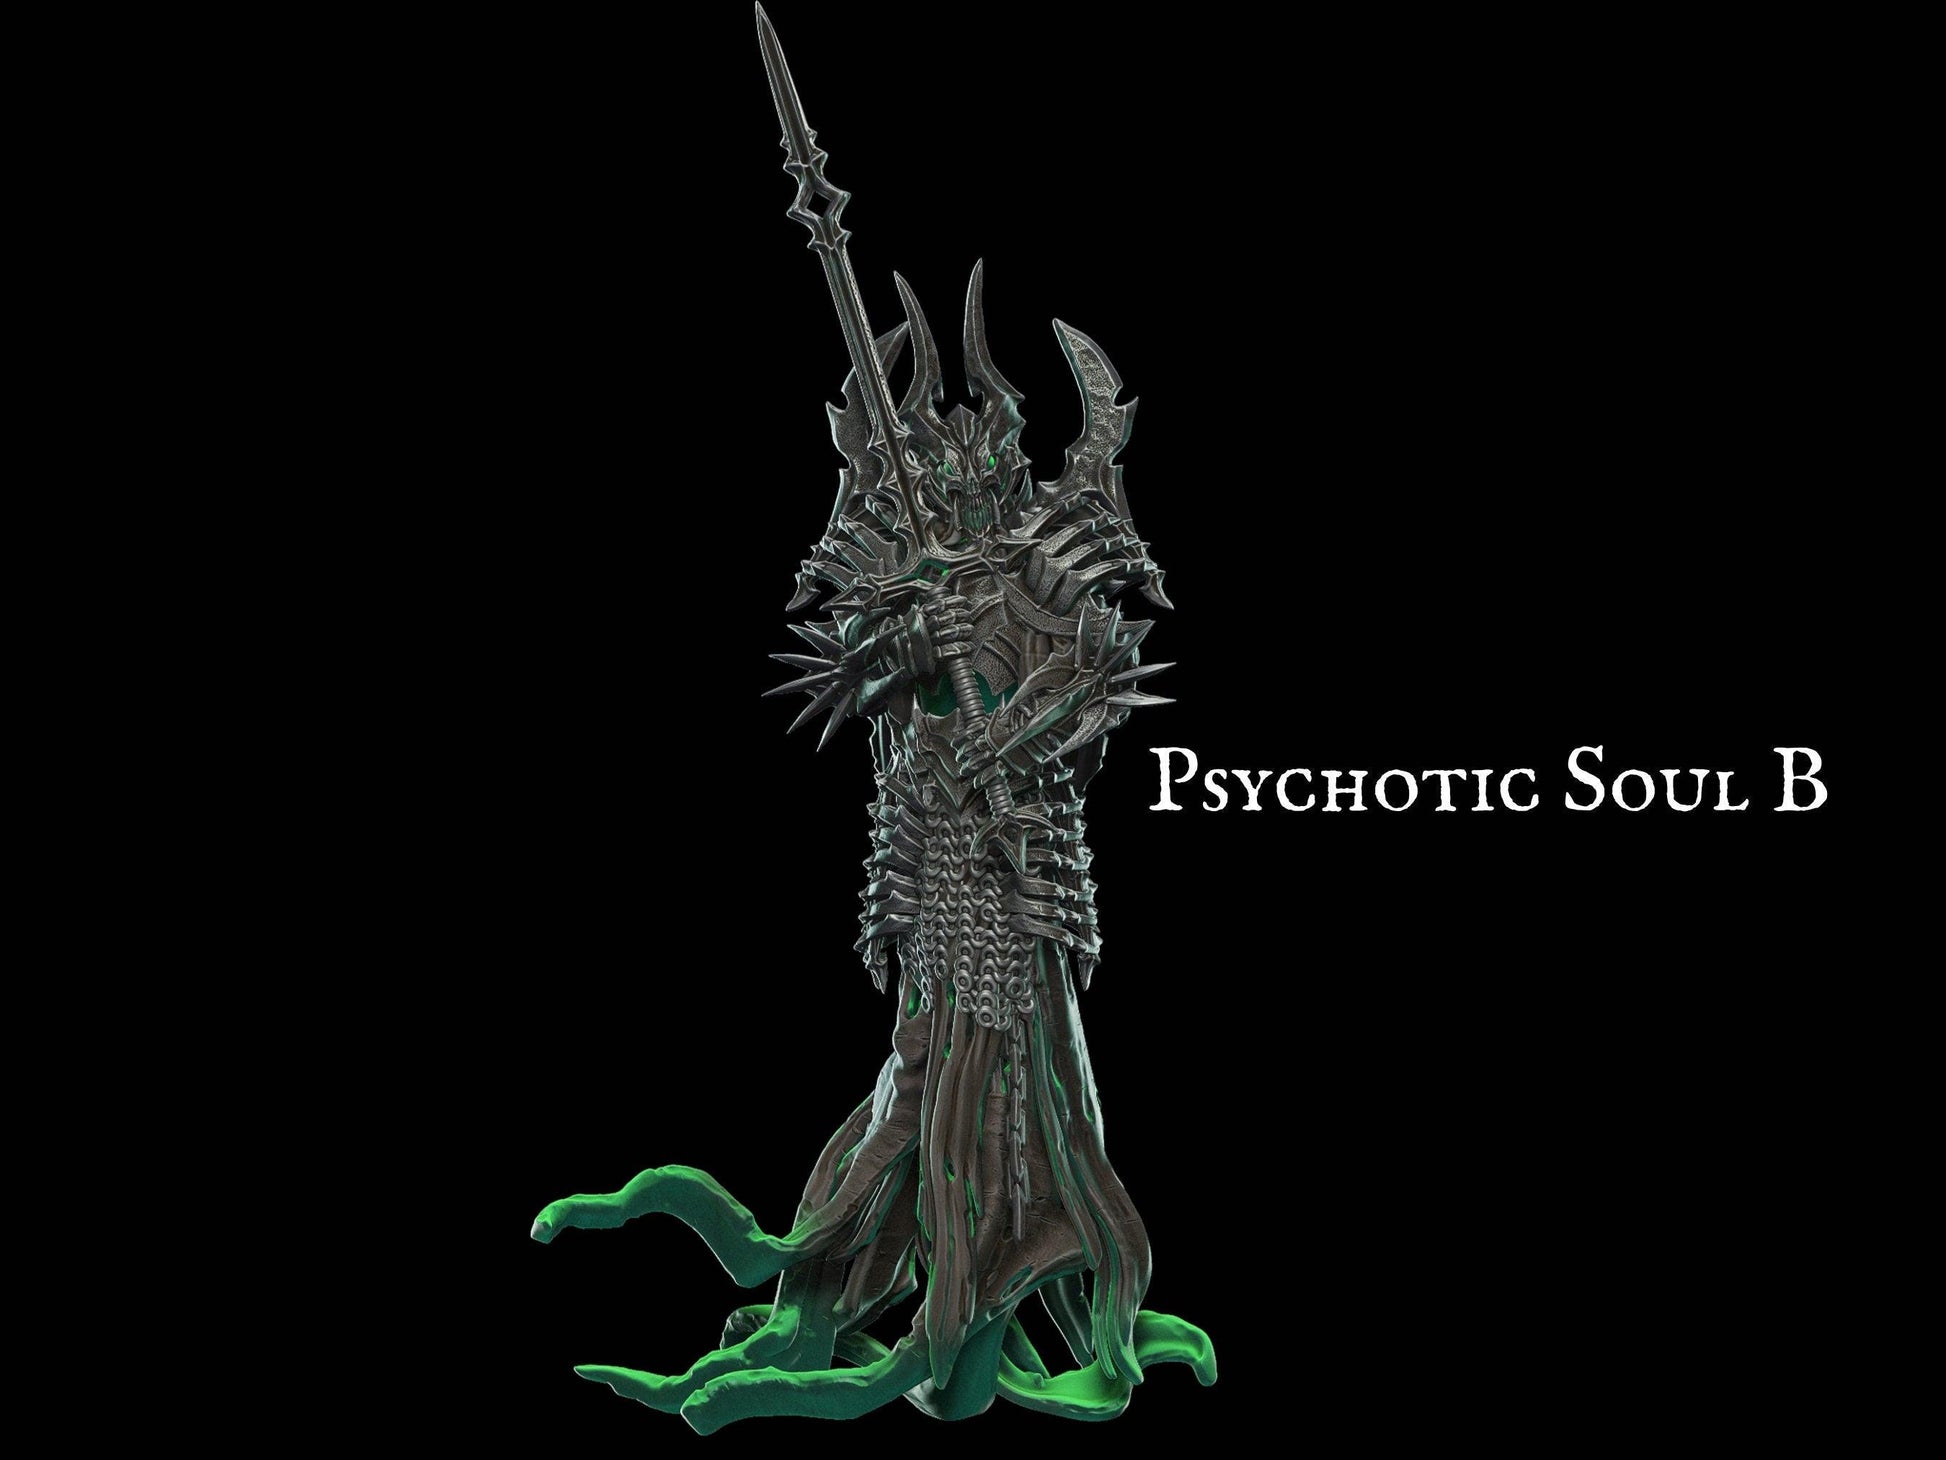 Psychotic Soul Miniature - 3 Poses - 28mm scale Tabletop gaming DnD Miniature Dungeons and Dragons, ttrpg dnd 5e dungeon master gift - Plague Miniatures shop for DnD Miniatures